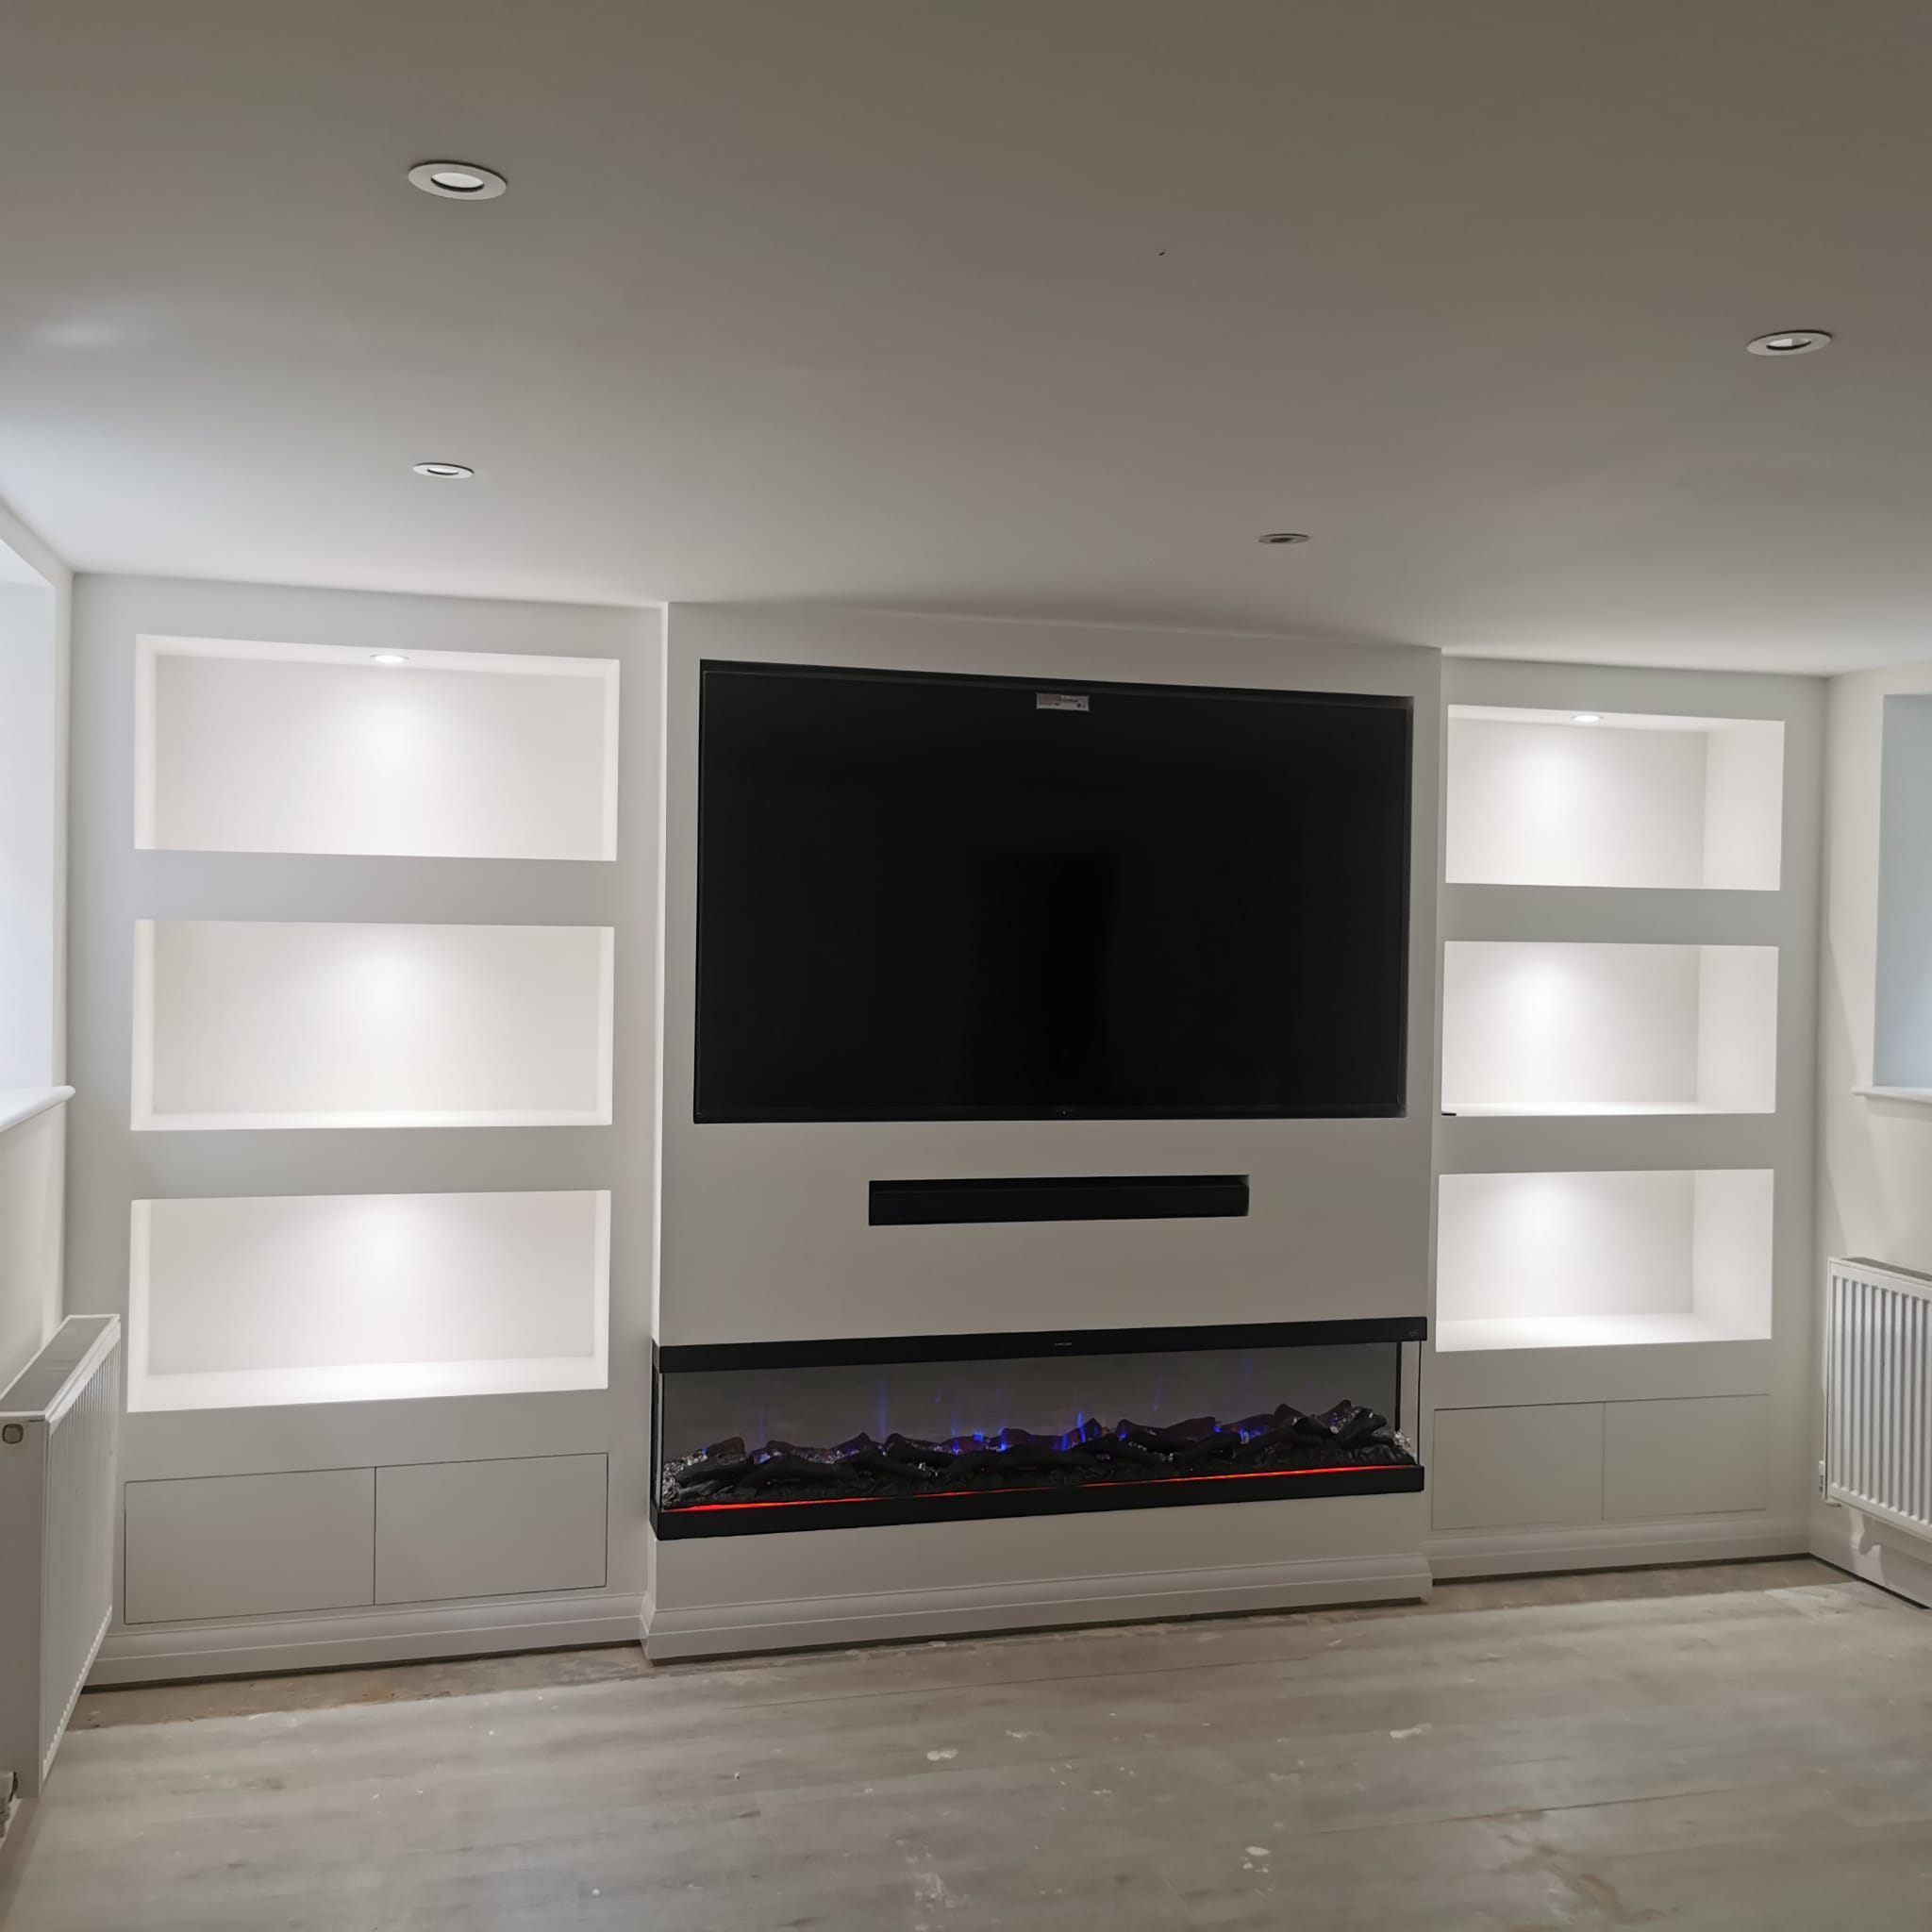 Greenhithe - Full Media Wall And Fireplace Installation by Deal Installations and Maintenance Ltd.